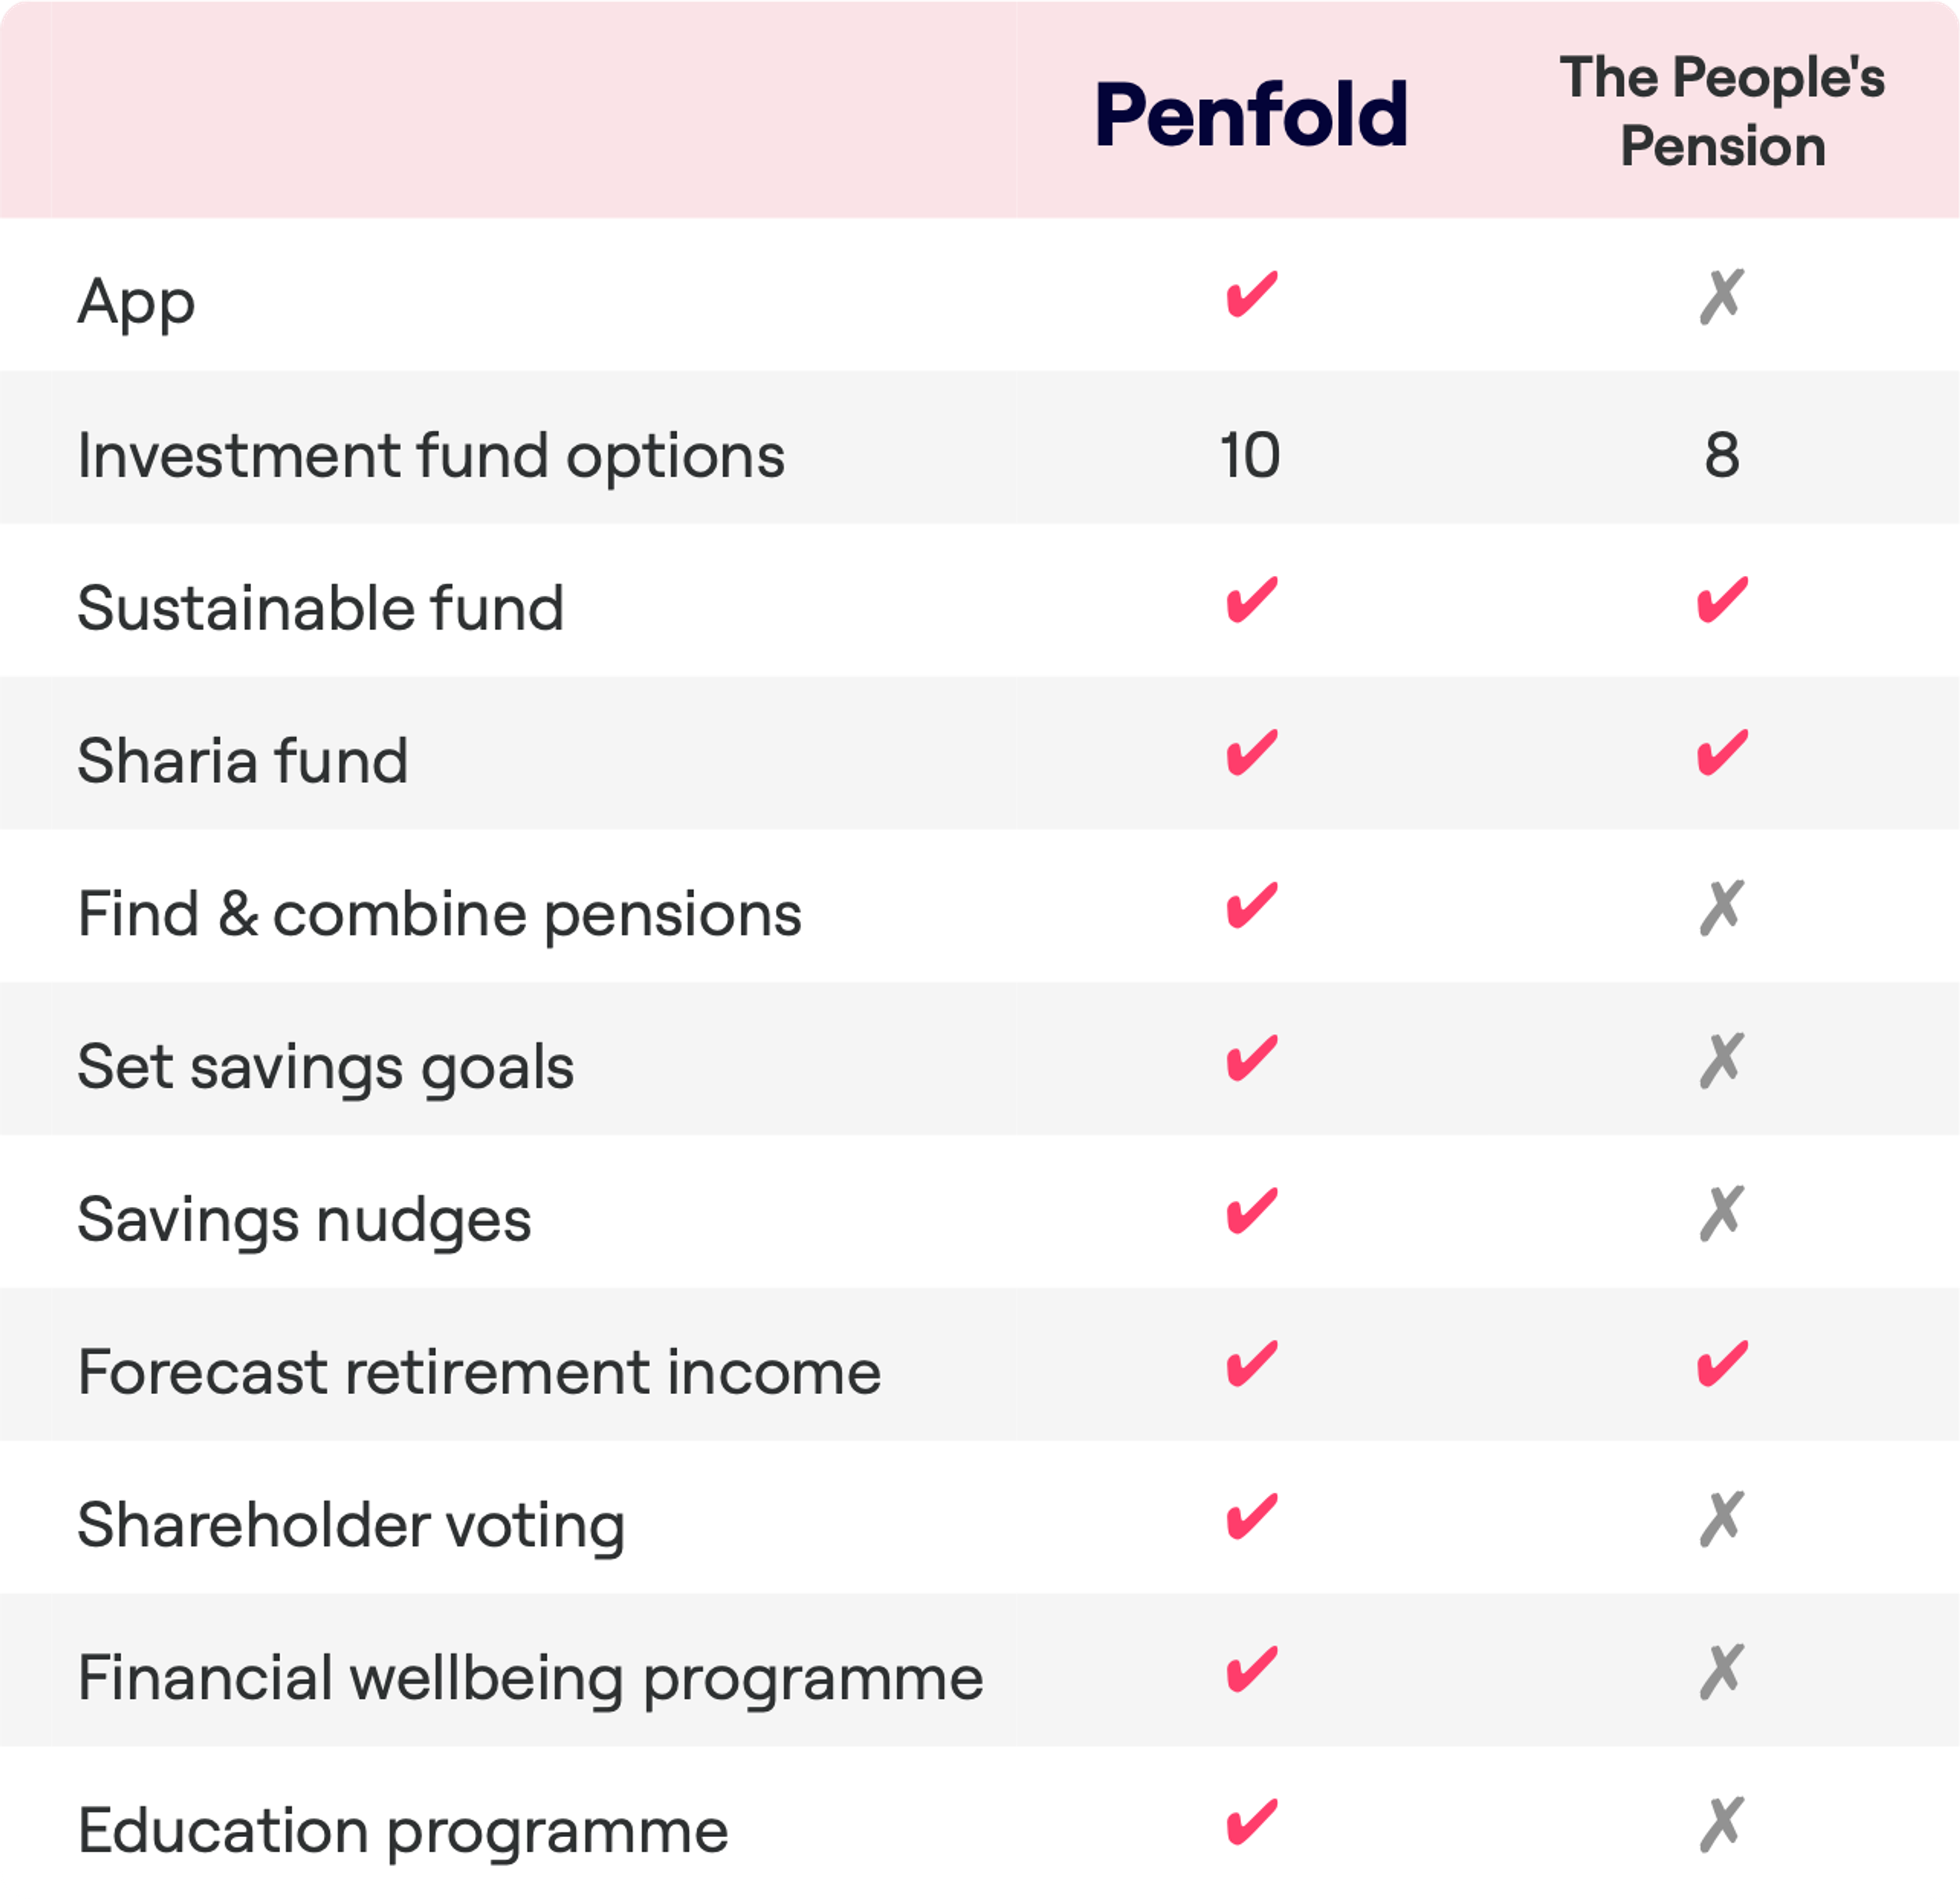 A feature comparison chart for Penfold and The People's Pension services. Penfold offers a mobile app, 10 investment fund options, sustainable and Sharia funds, options to find and combine pensions, set savings goals, savings nudges, forecast retirement income, shareholder voting, a financial wellbeing programme, and an education programme. The People's Pension does not have an app and offers 8 investment fund options, sustainable and Sharia funds, and retirement income forecasting, but lacks the other features offered by Penfold.